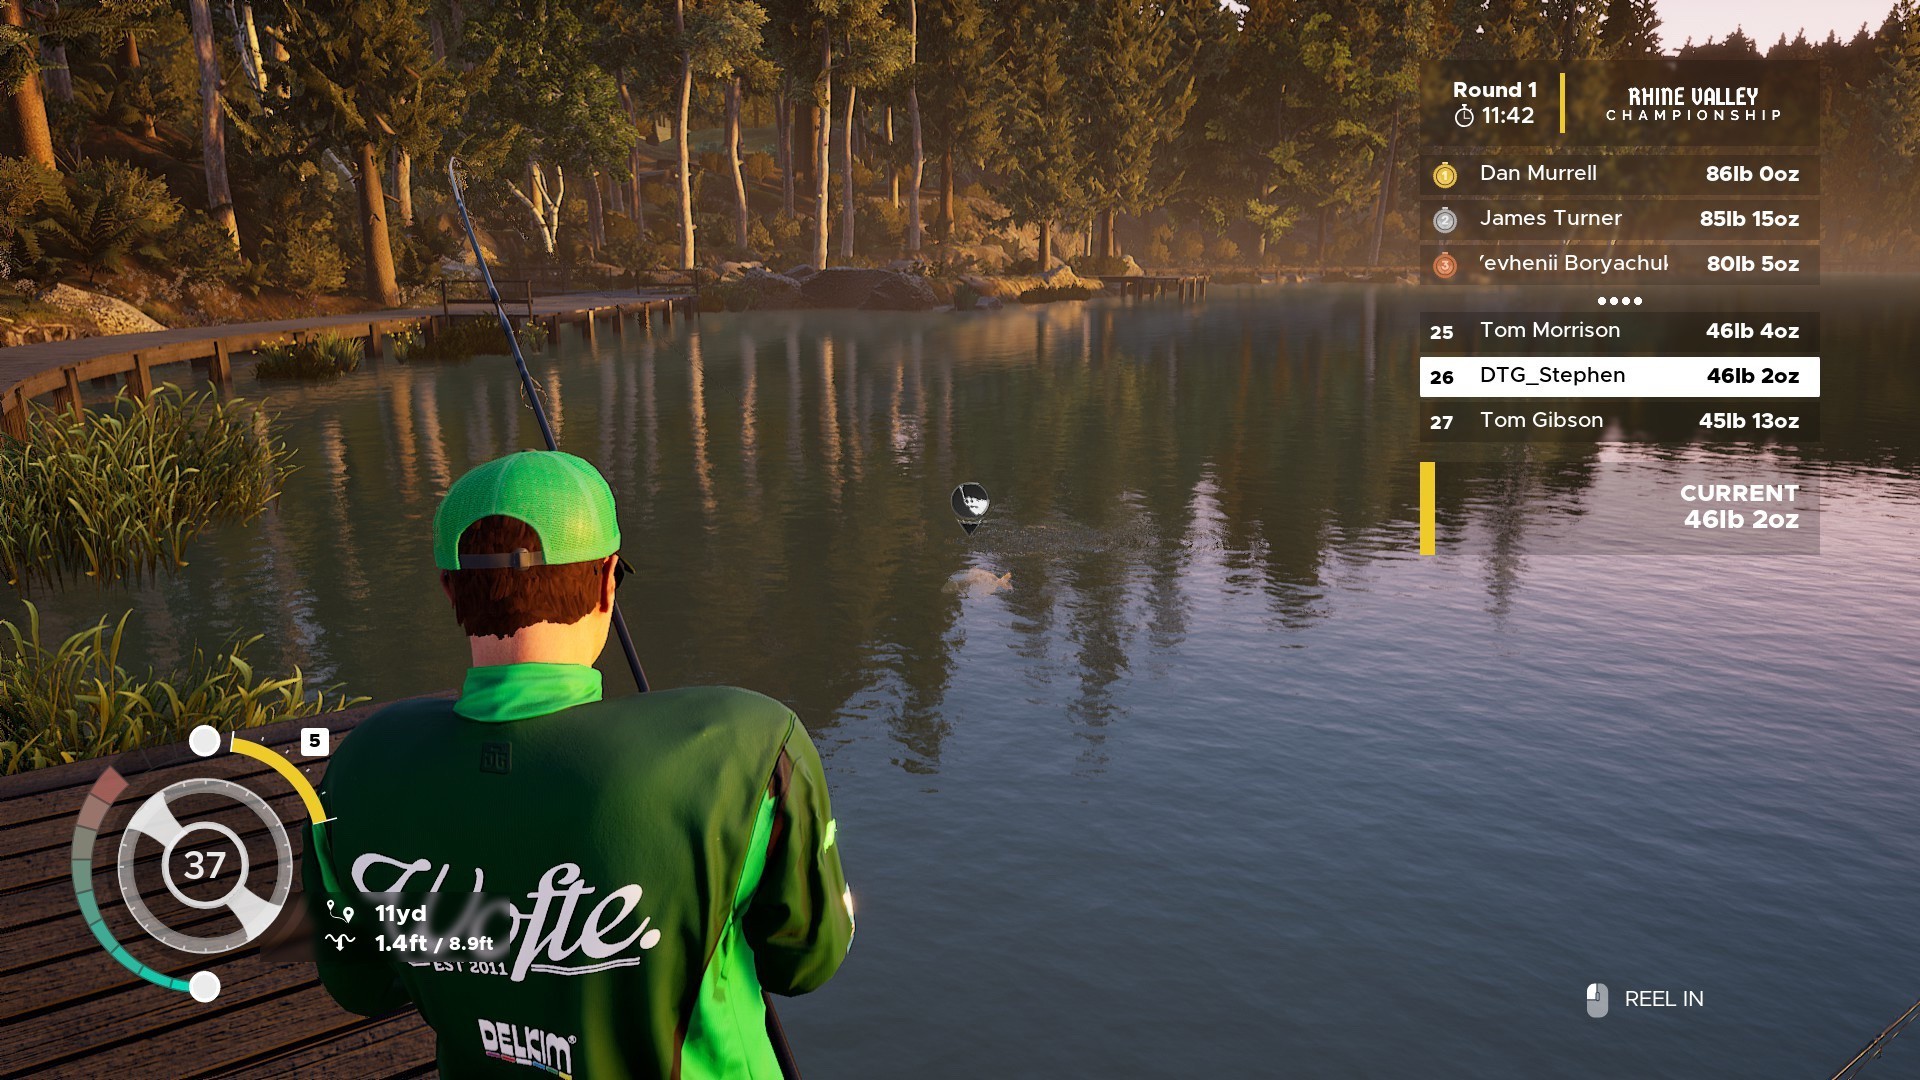 Fishing Sim World: Pro Tour - Deluxe Edition